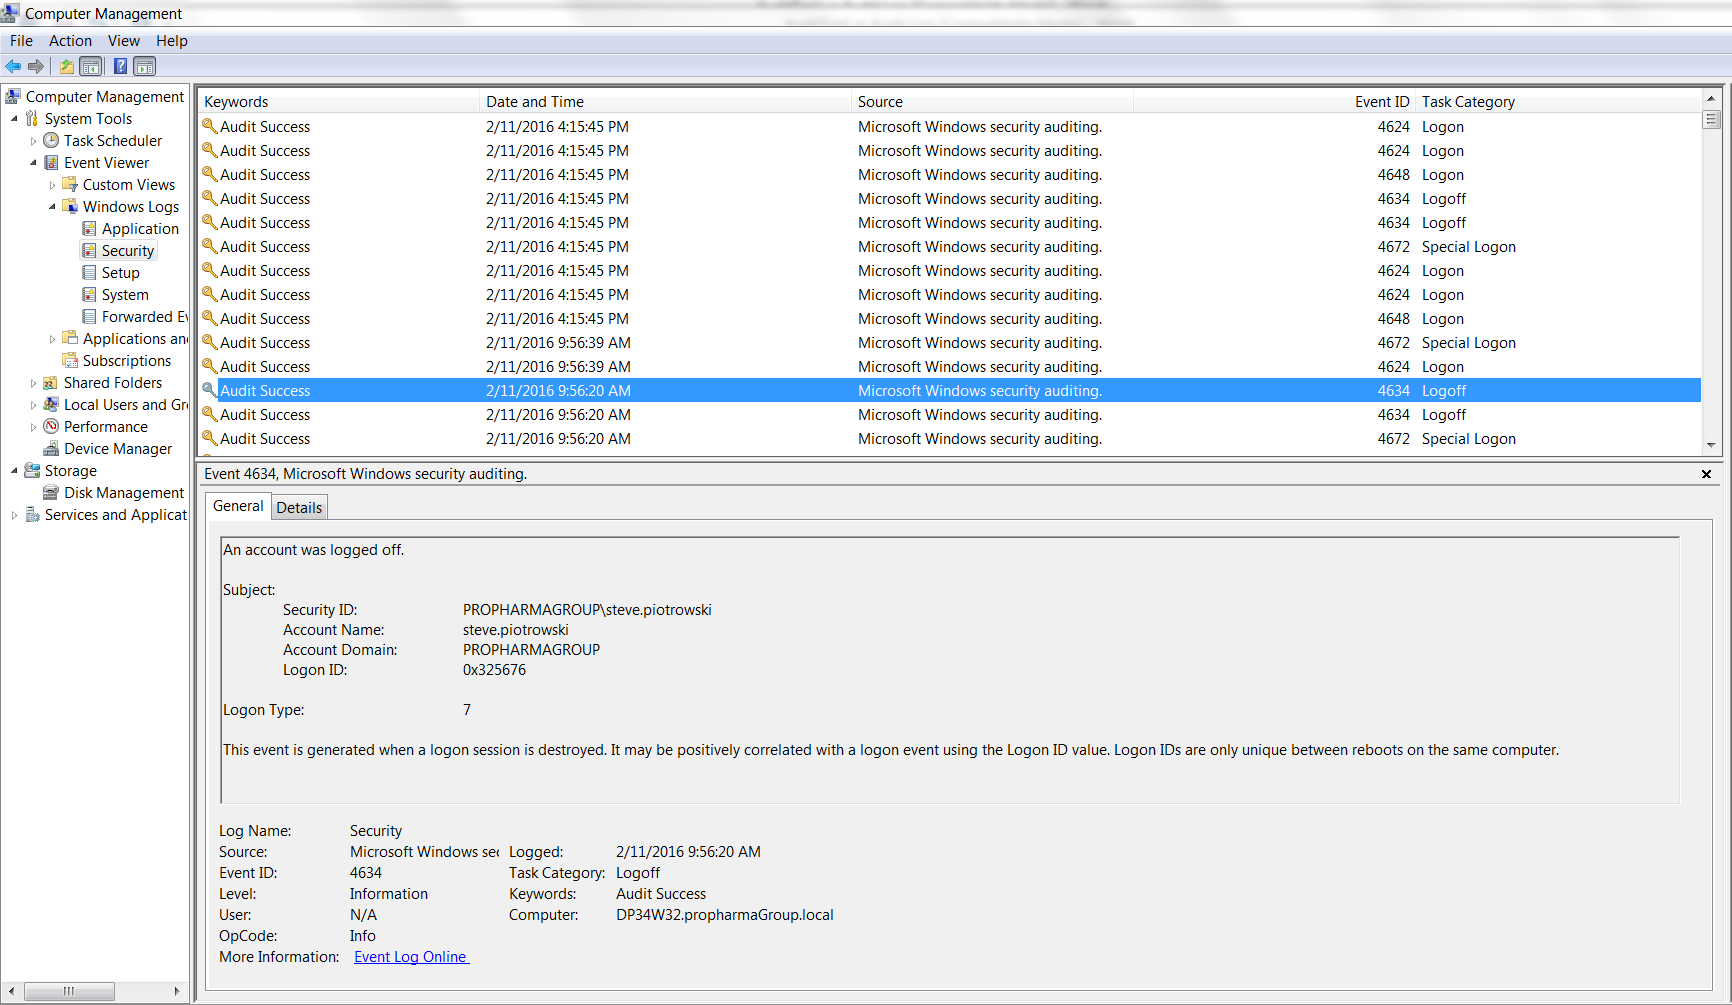 Example of data logged in Microsoft Windows's Event Viewer